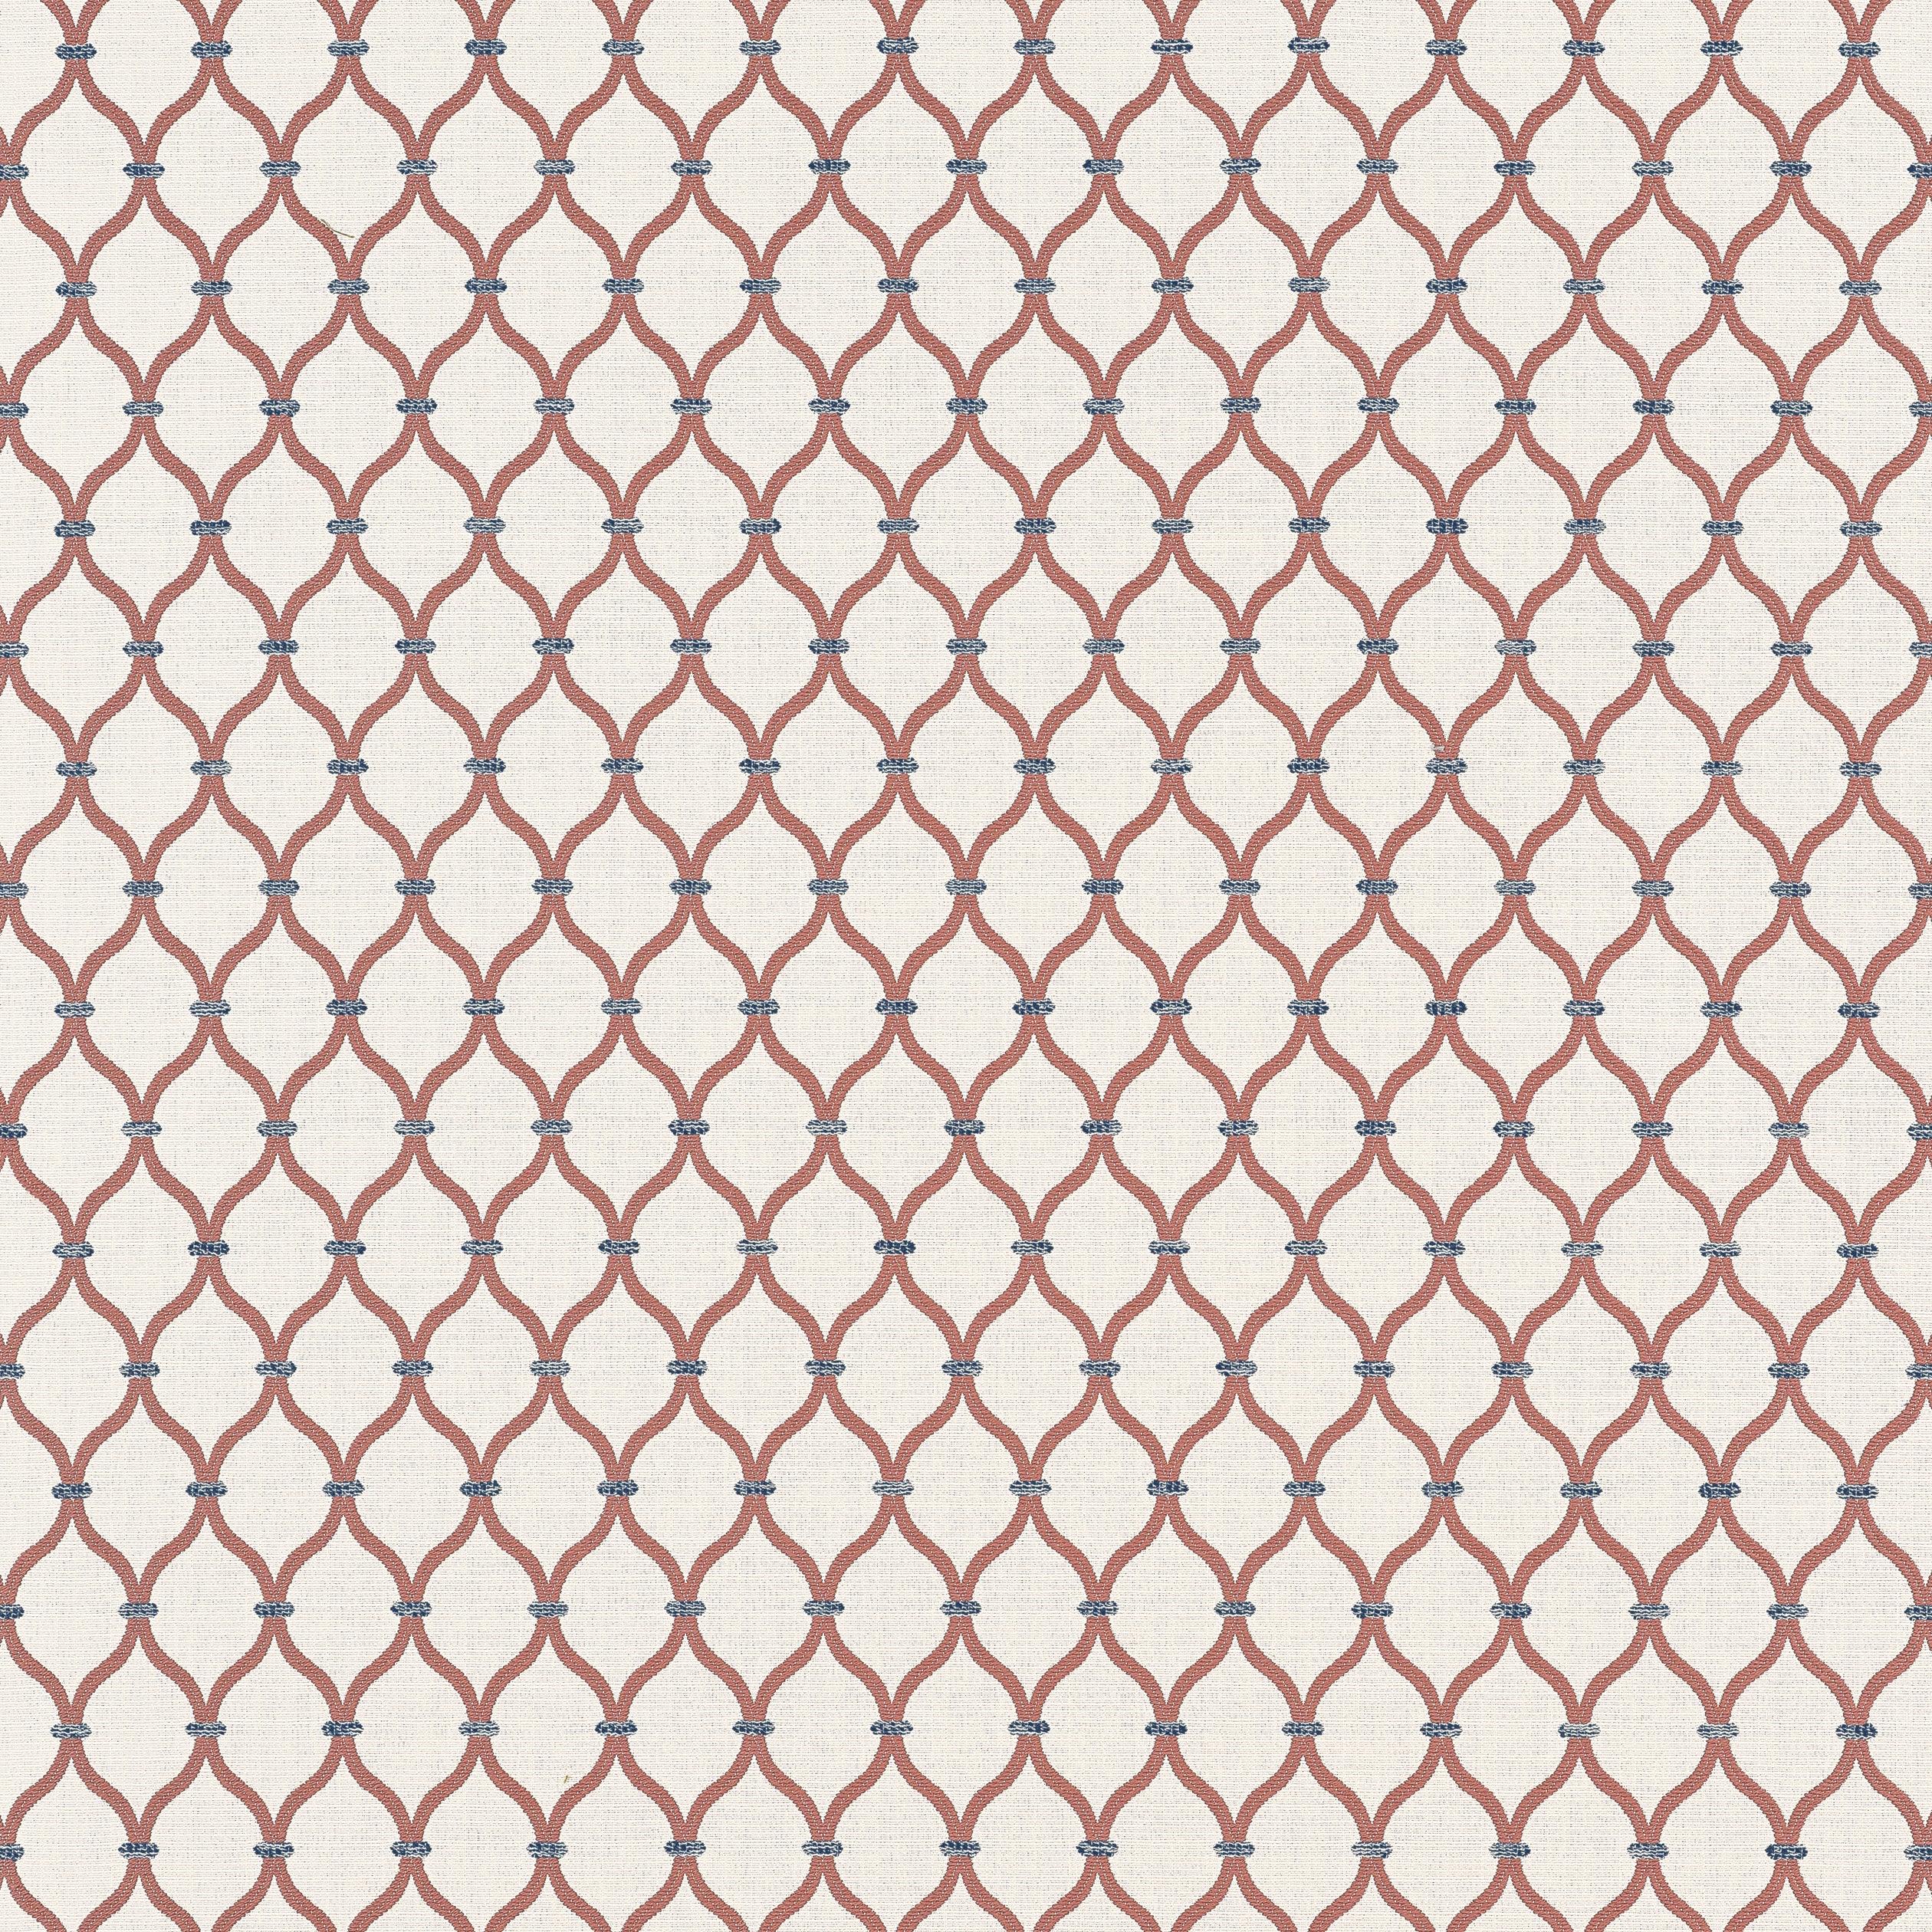 Chandler fabric in terracotta color - pattern number W81935 - by Thibaut in the Companions collection